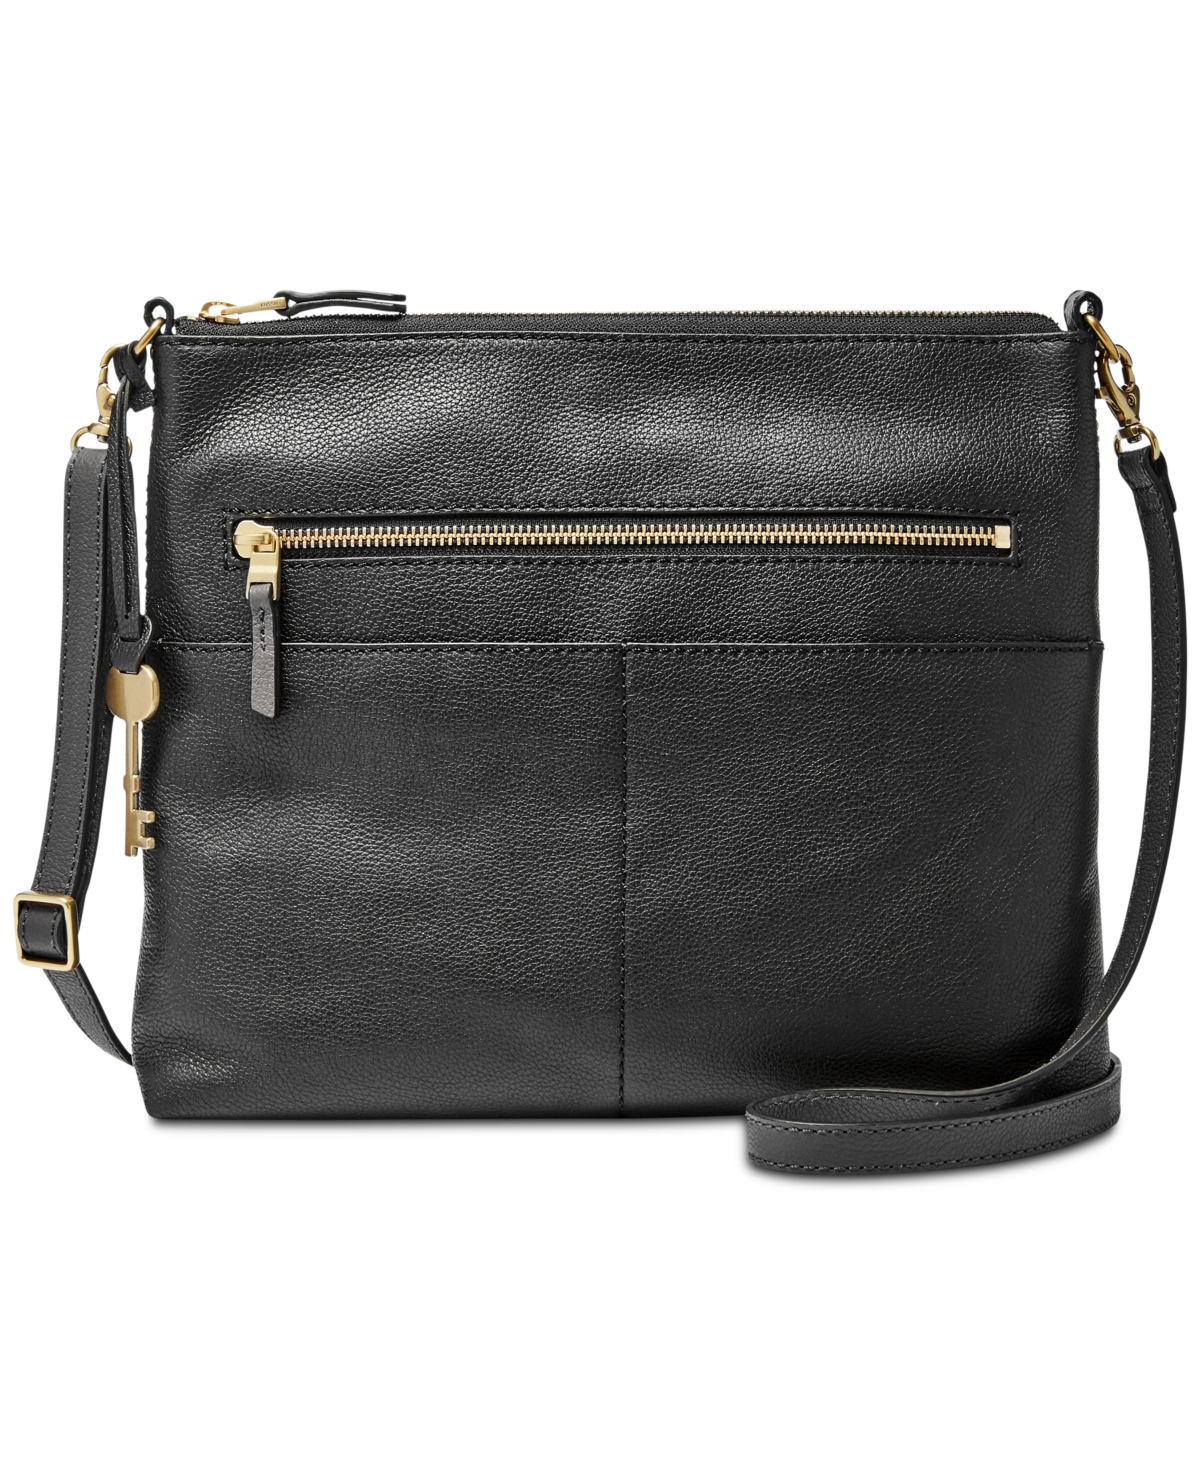 Fossil Women's Fiona Large Leather Crossbody In Black,gold